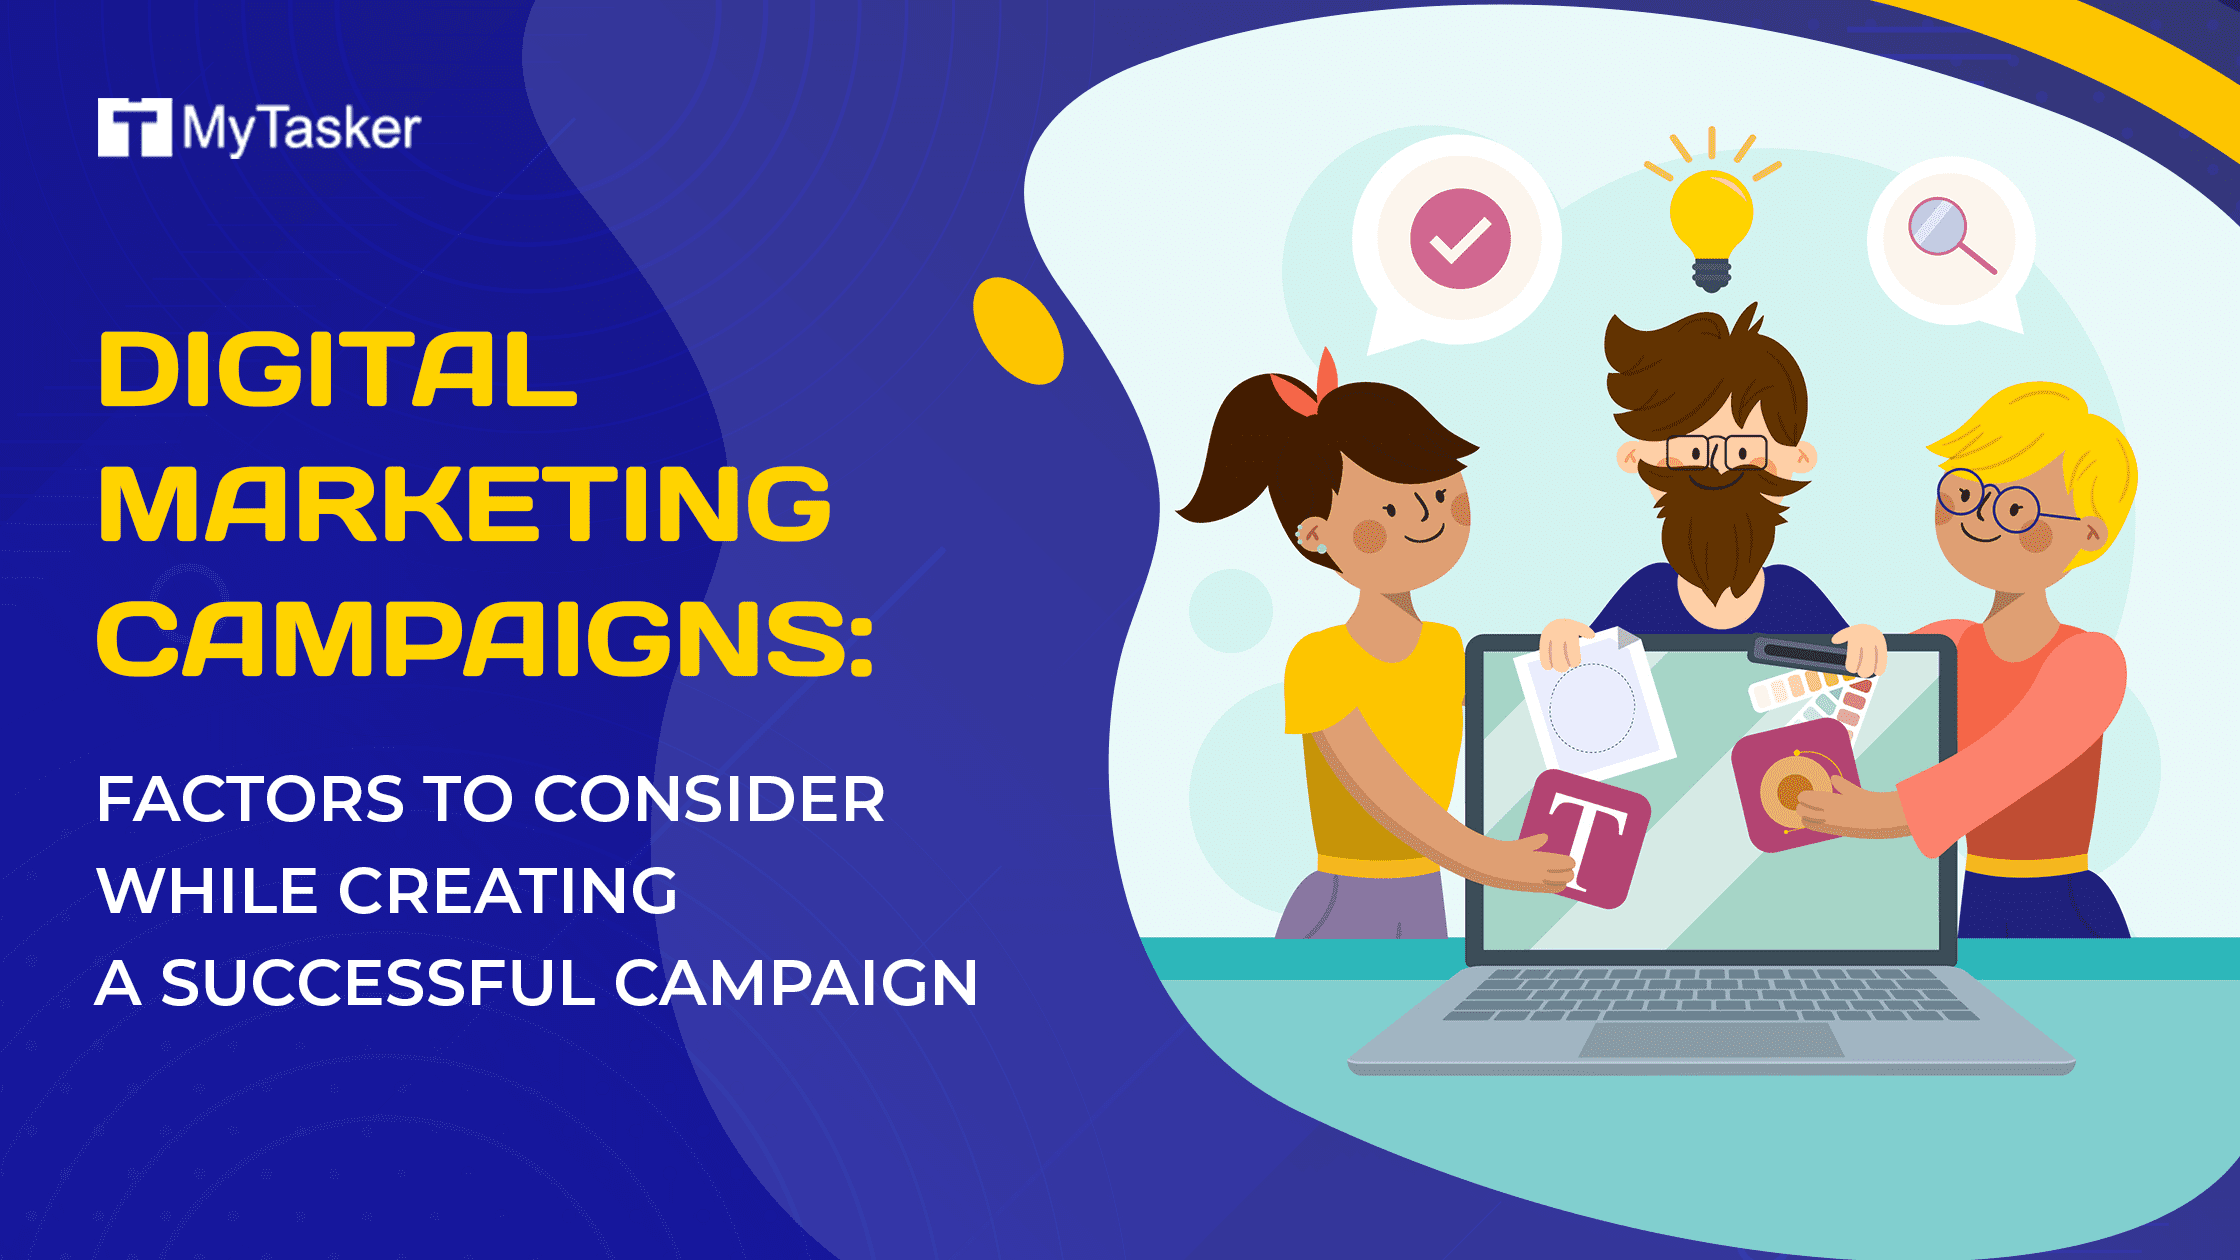 Digital Marketing Campaigns: Factors To Consider While Creating A Successful Campaign